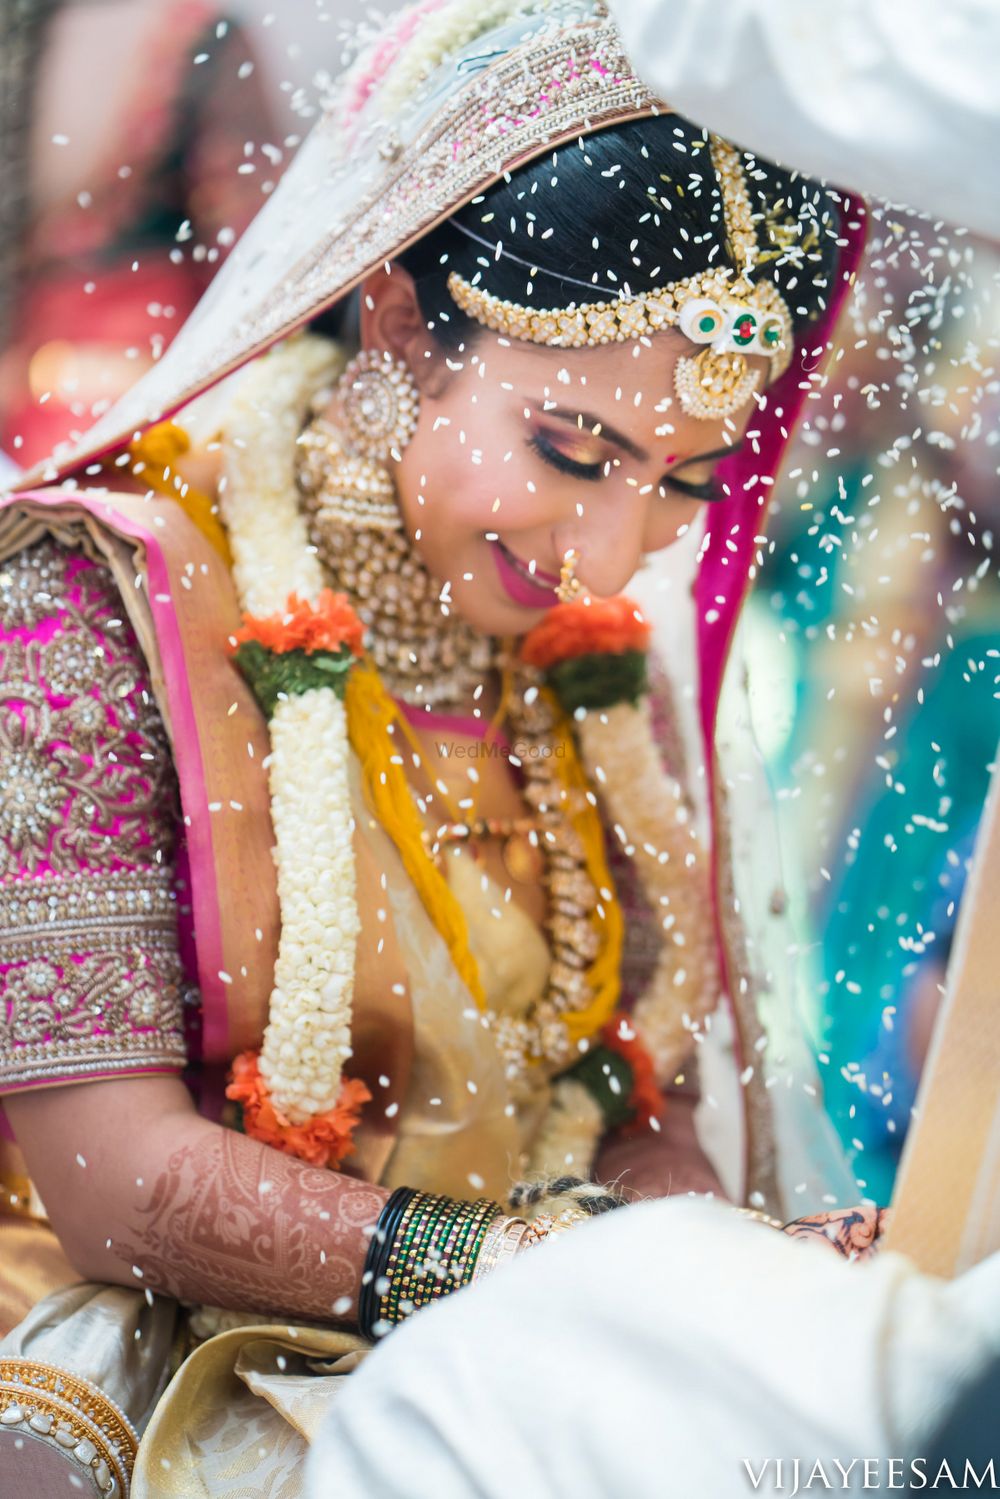 Photo of Candid shot of a South Indian bride from her wedding day.